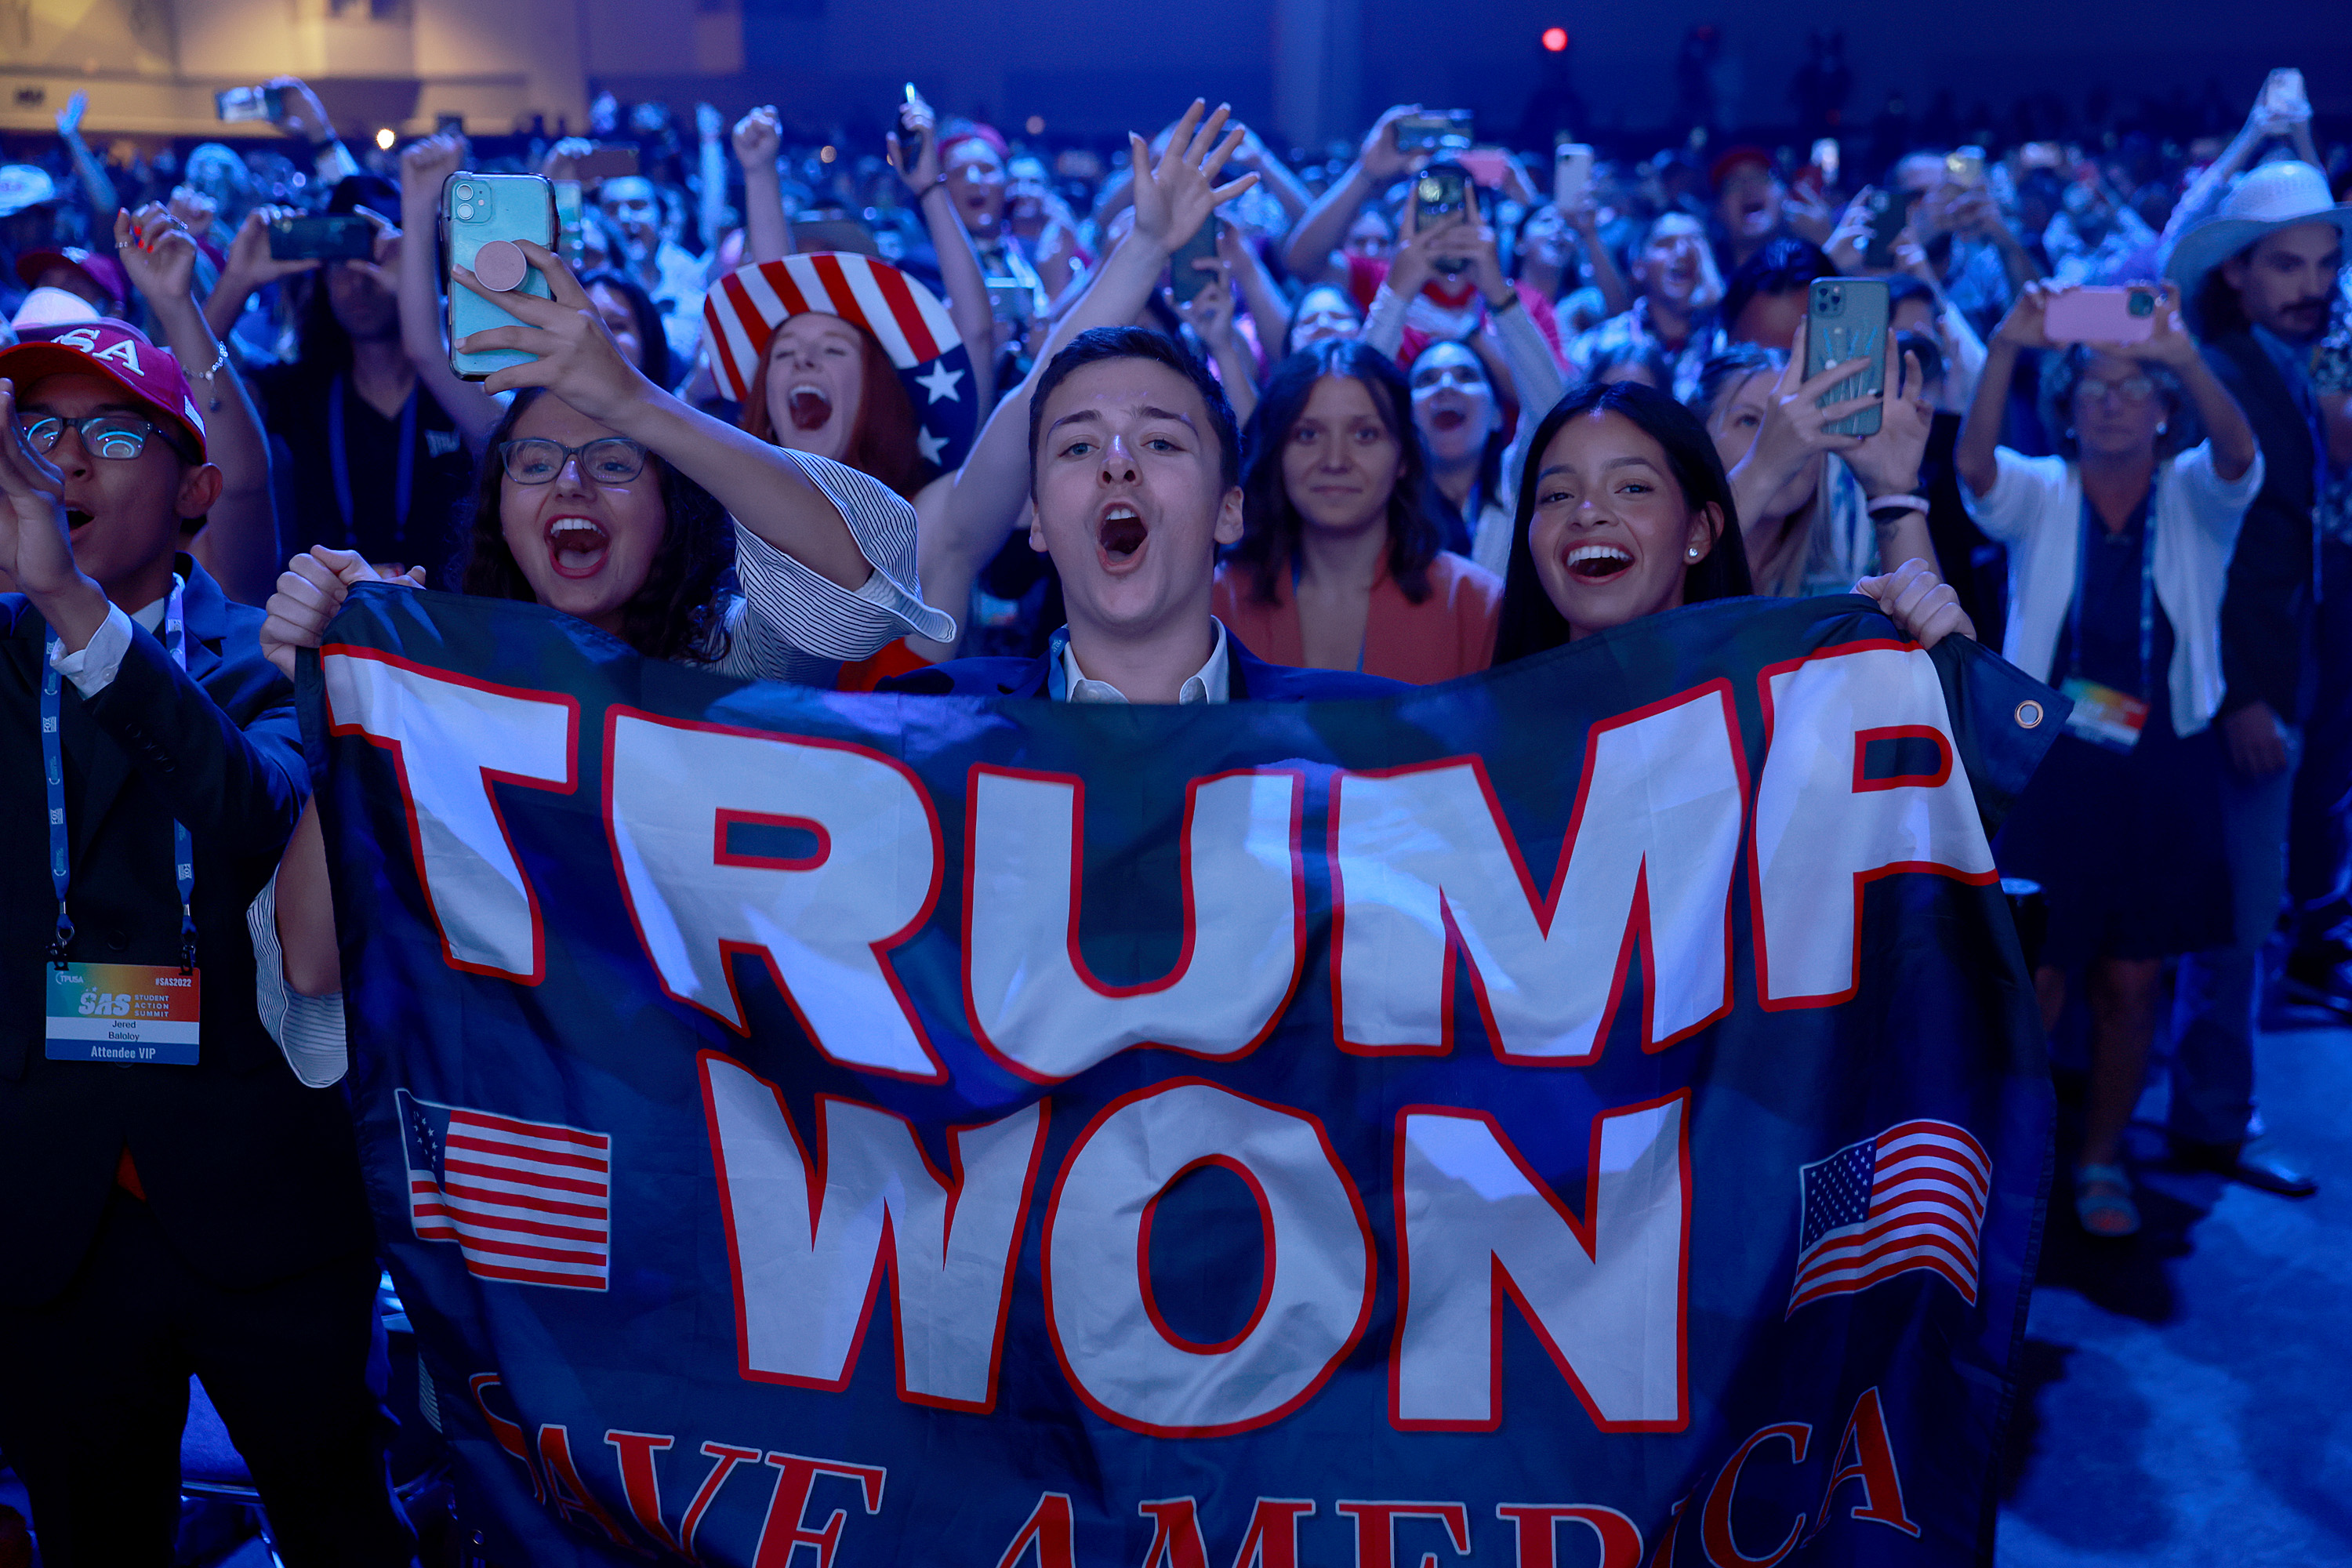 People cheer as former President Donald Trump arrives on stage during the Turning Point USA Student Action Summit held at the Tampa Convention Center on July 23, 2022 in Tampa, Fla.